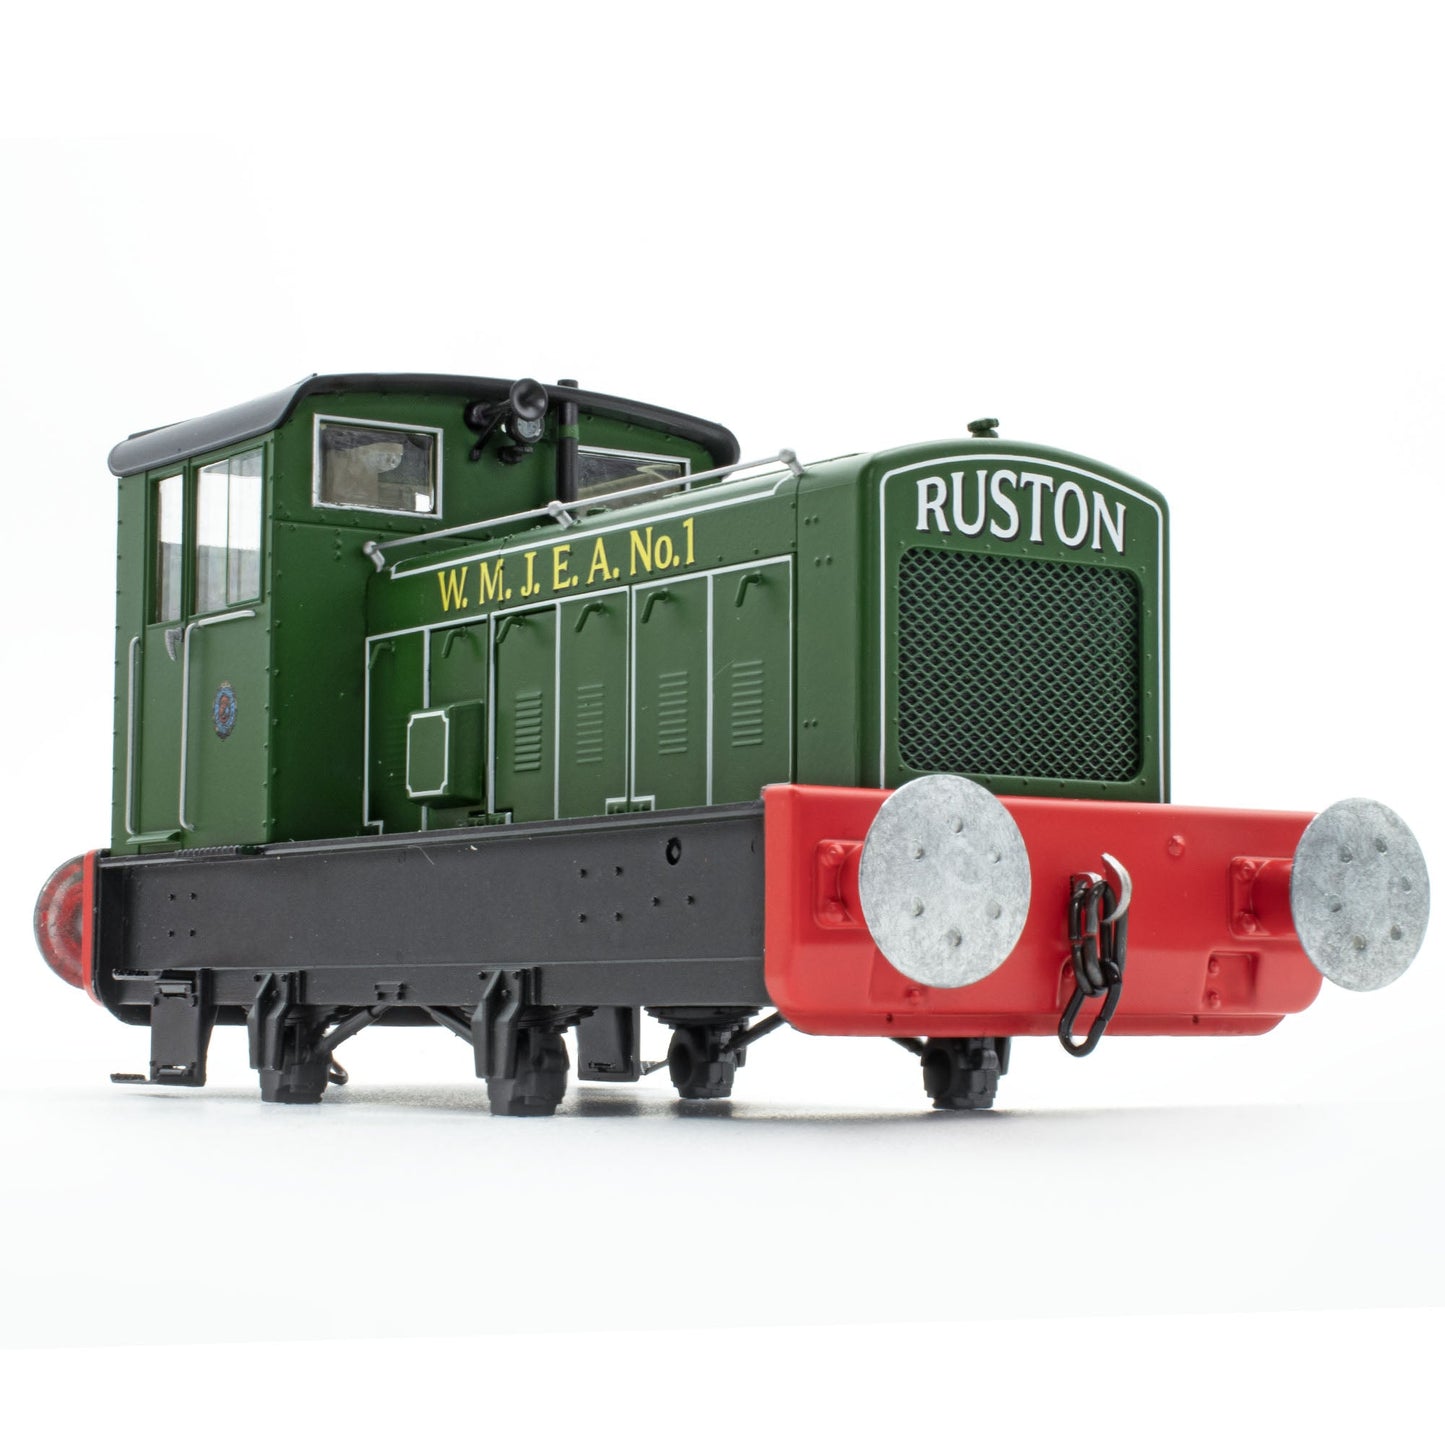 262997/1949 - West Midlands Joint Electricity Authority No. 1 - Ruston Works' Green